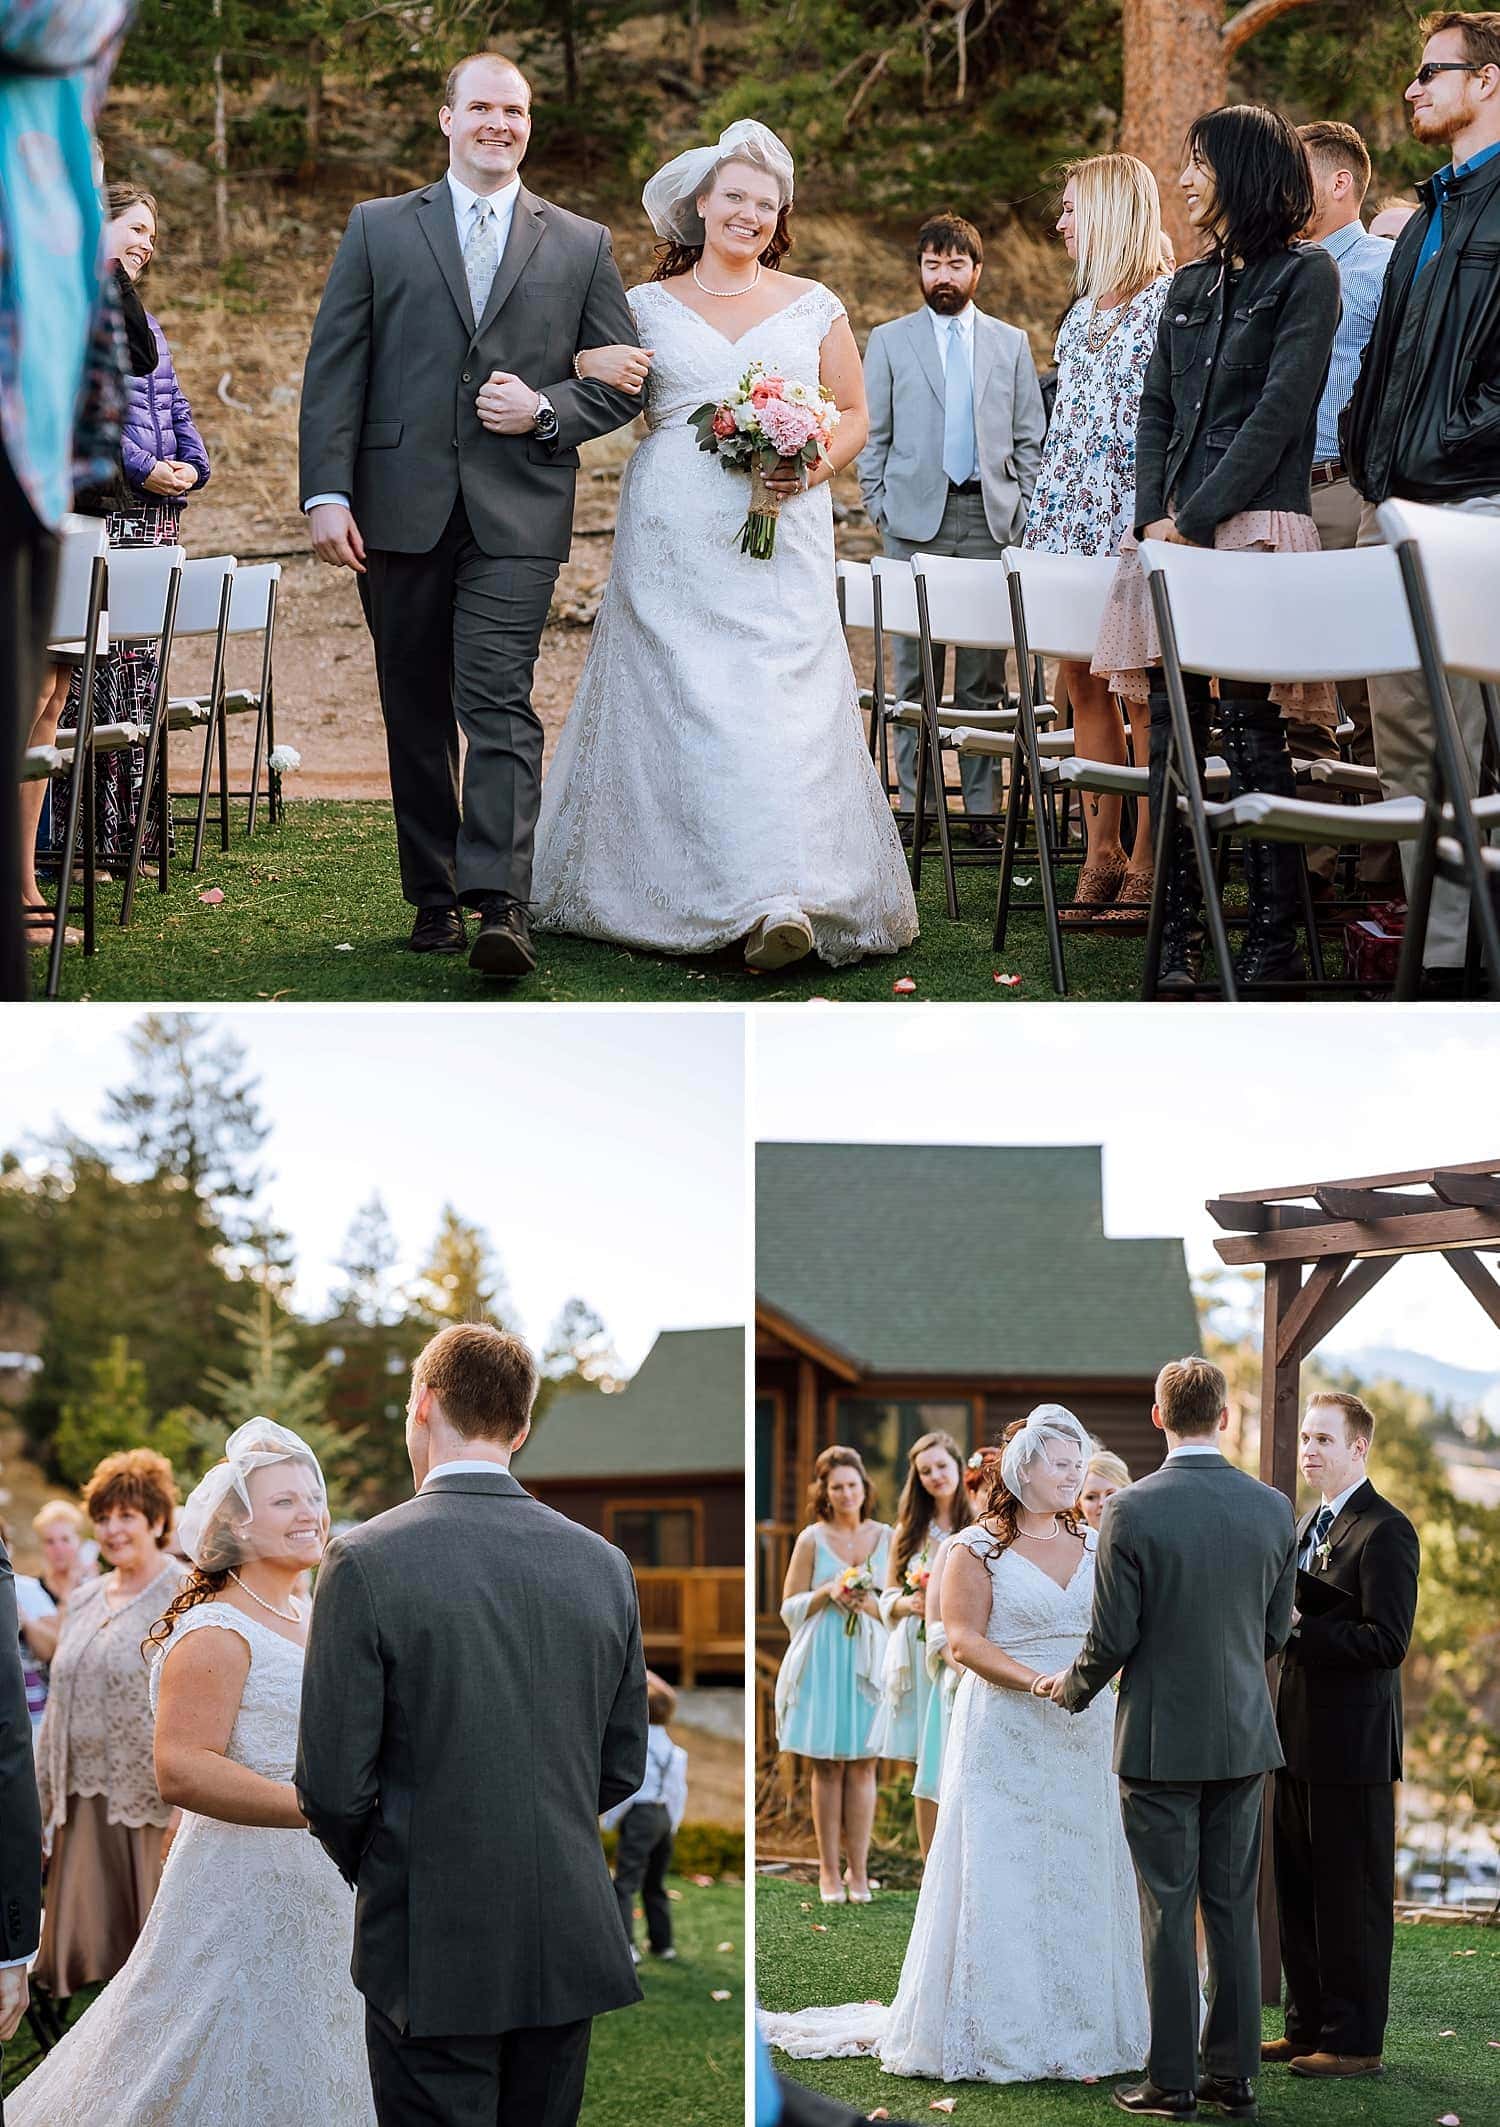 Bride walks down aisle towards groom during ceremony at Mary's Lake Lodge in Estes Park, Colorado.